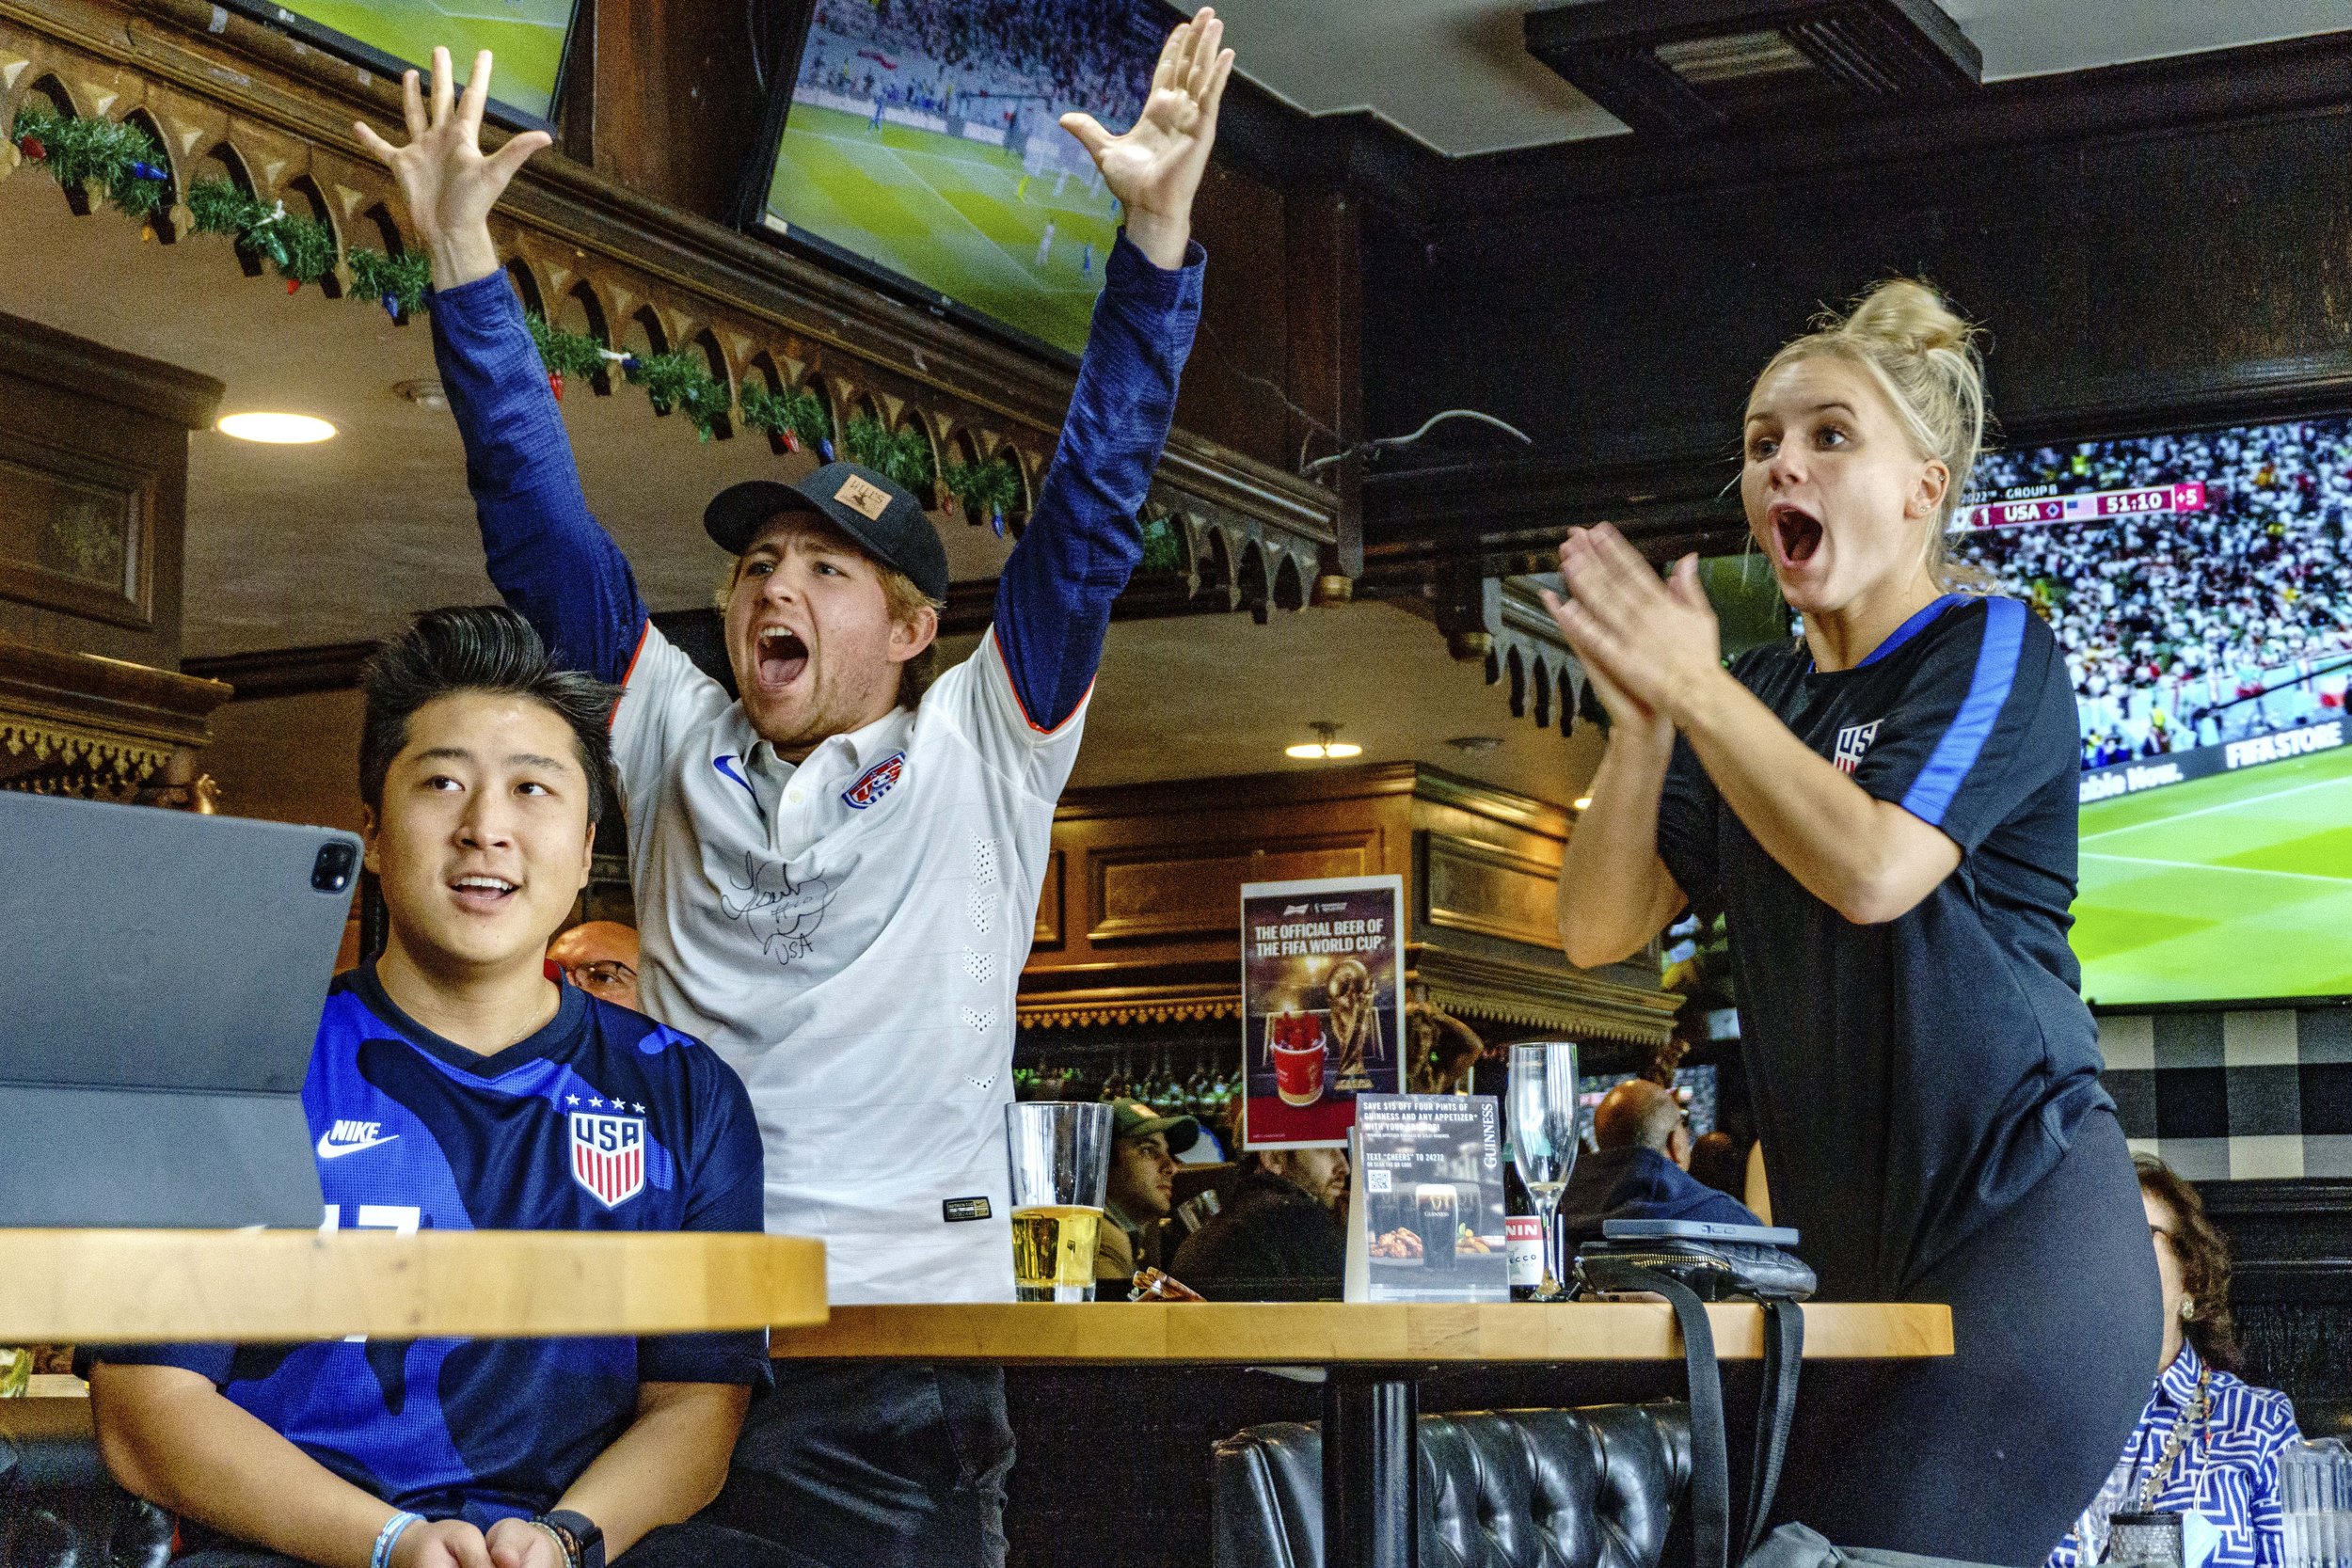  Friends Will Pai, Matt Fanelli and Bridget Toll cheer and support the USA soccer team as they play against Iran in the FIFA World Cup Qatar 2022 at Busby's West sports bar and restaurant in Santa Monica. The US team beat Iran 1-0 and are through to 